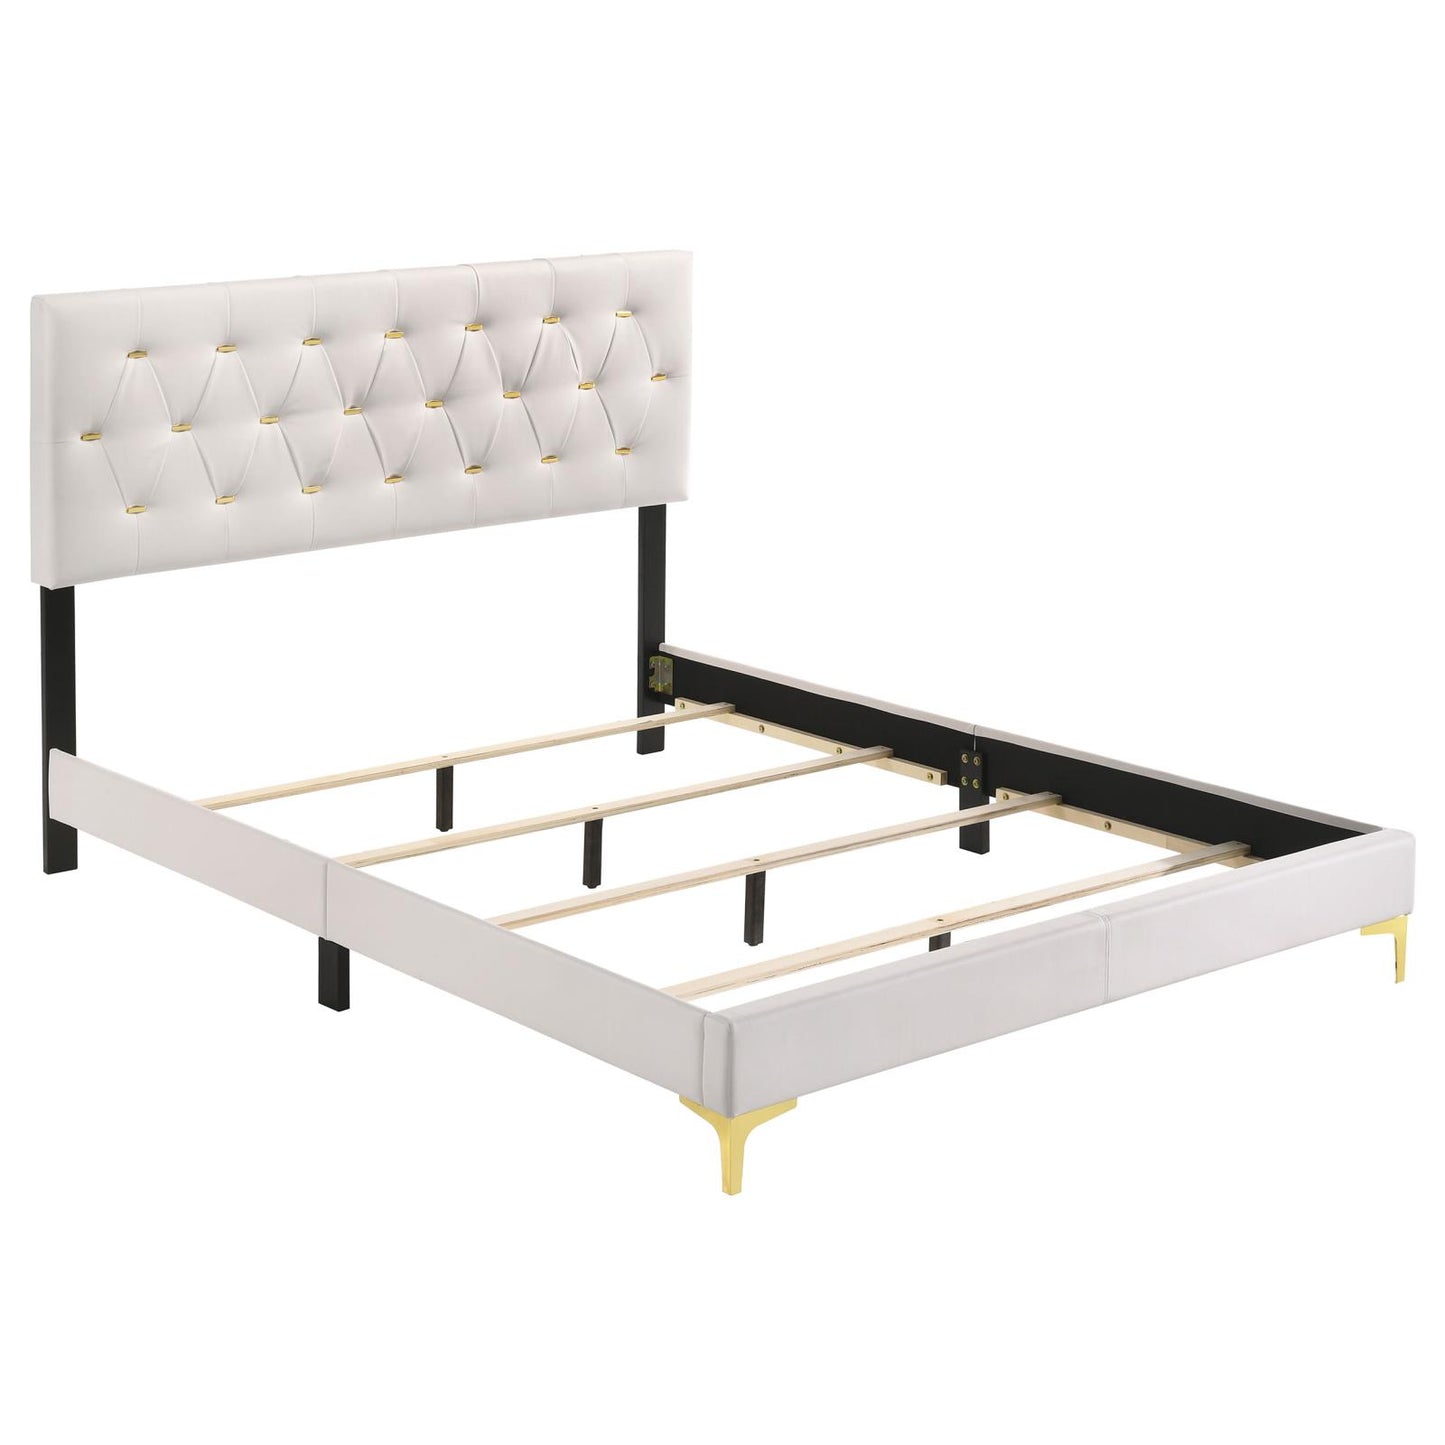 Kendall Tufted Upholstered Panel Eastern King Bed White